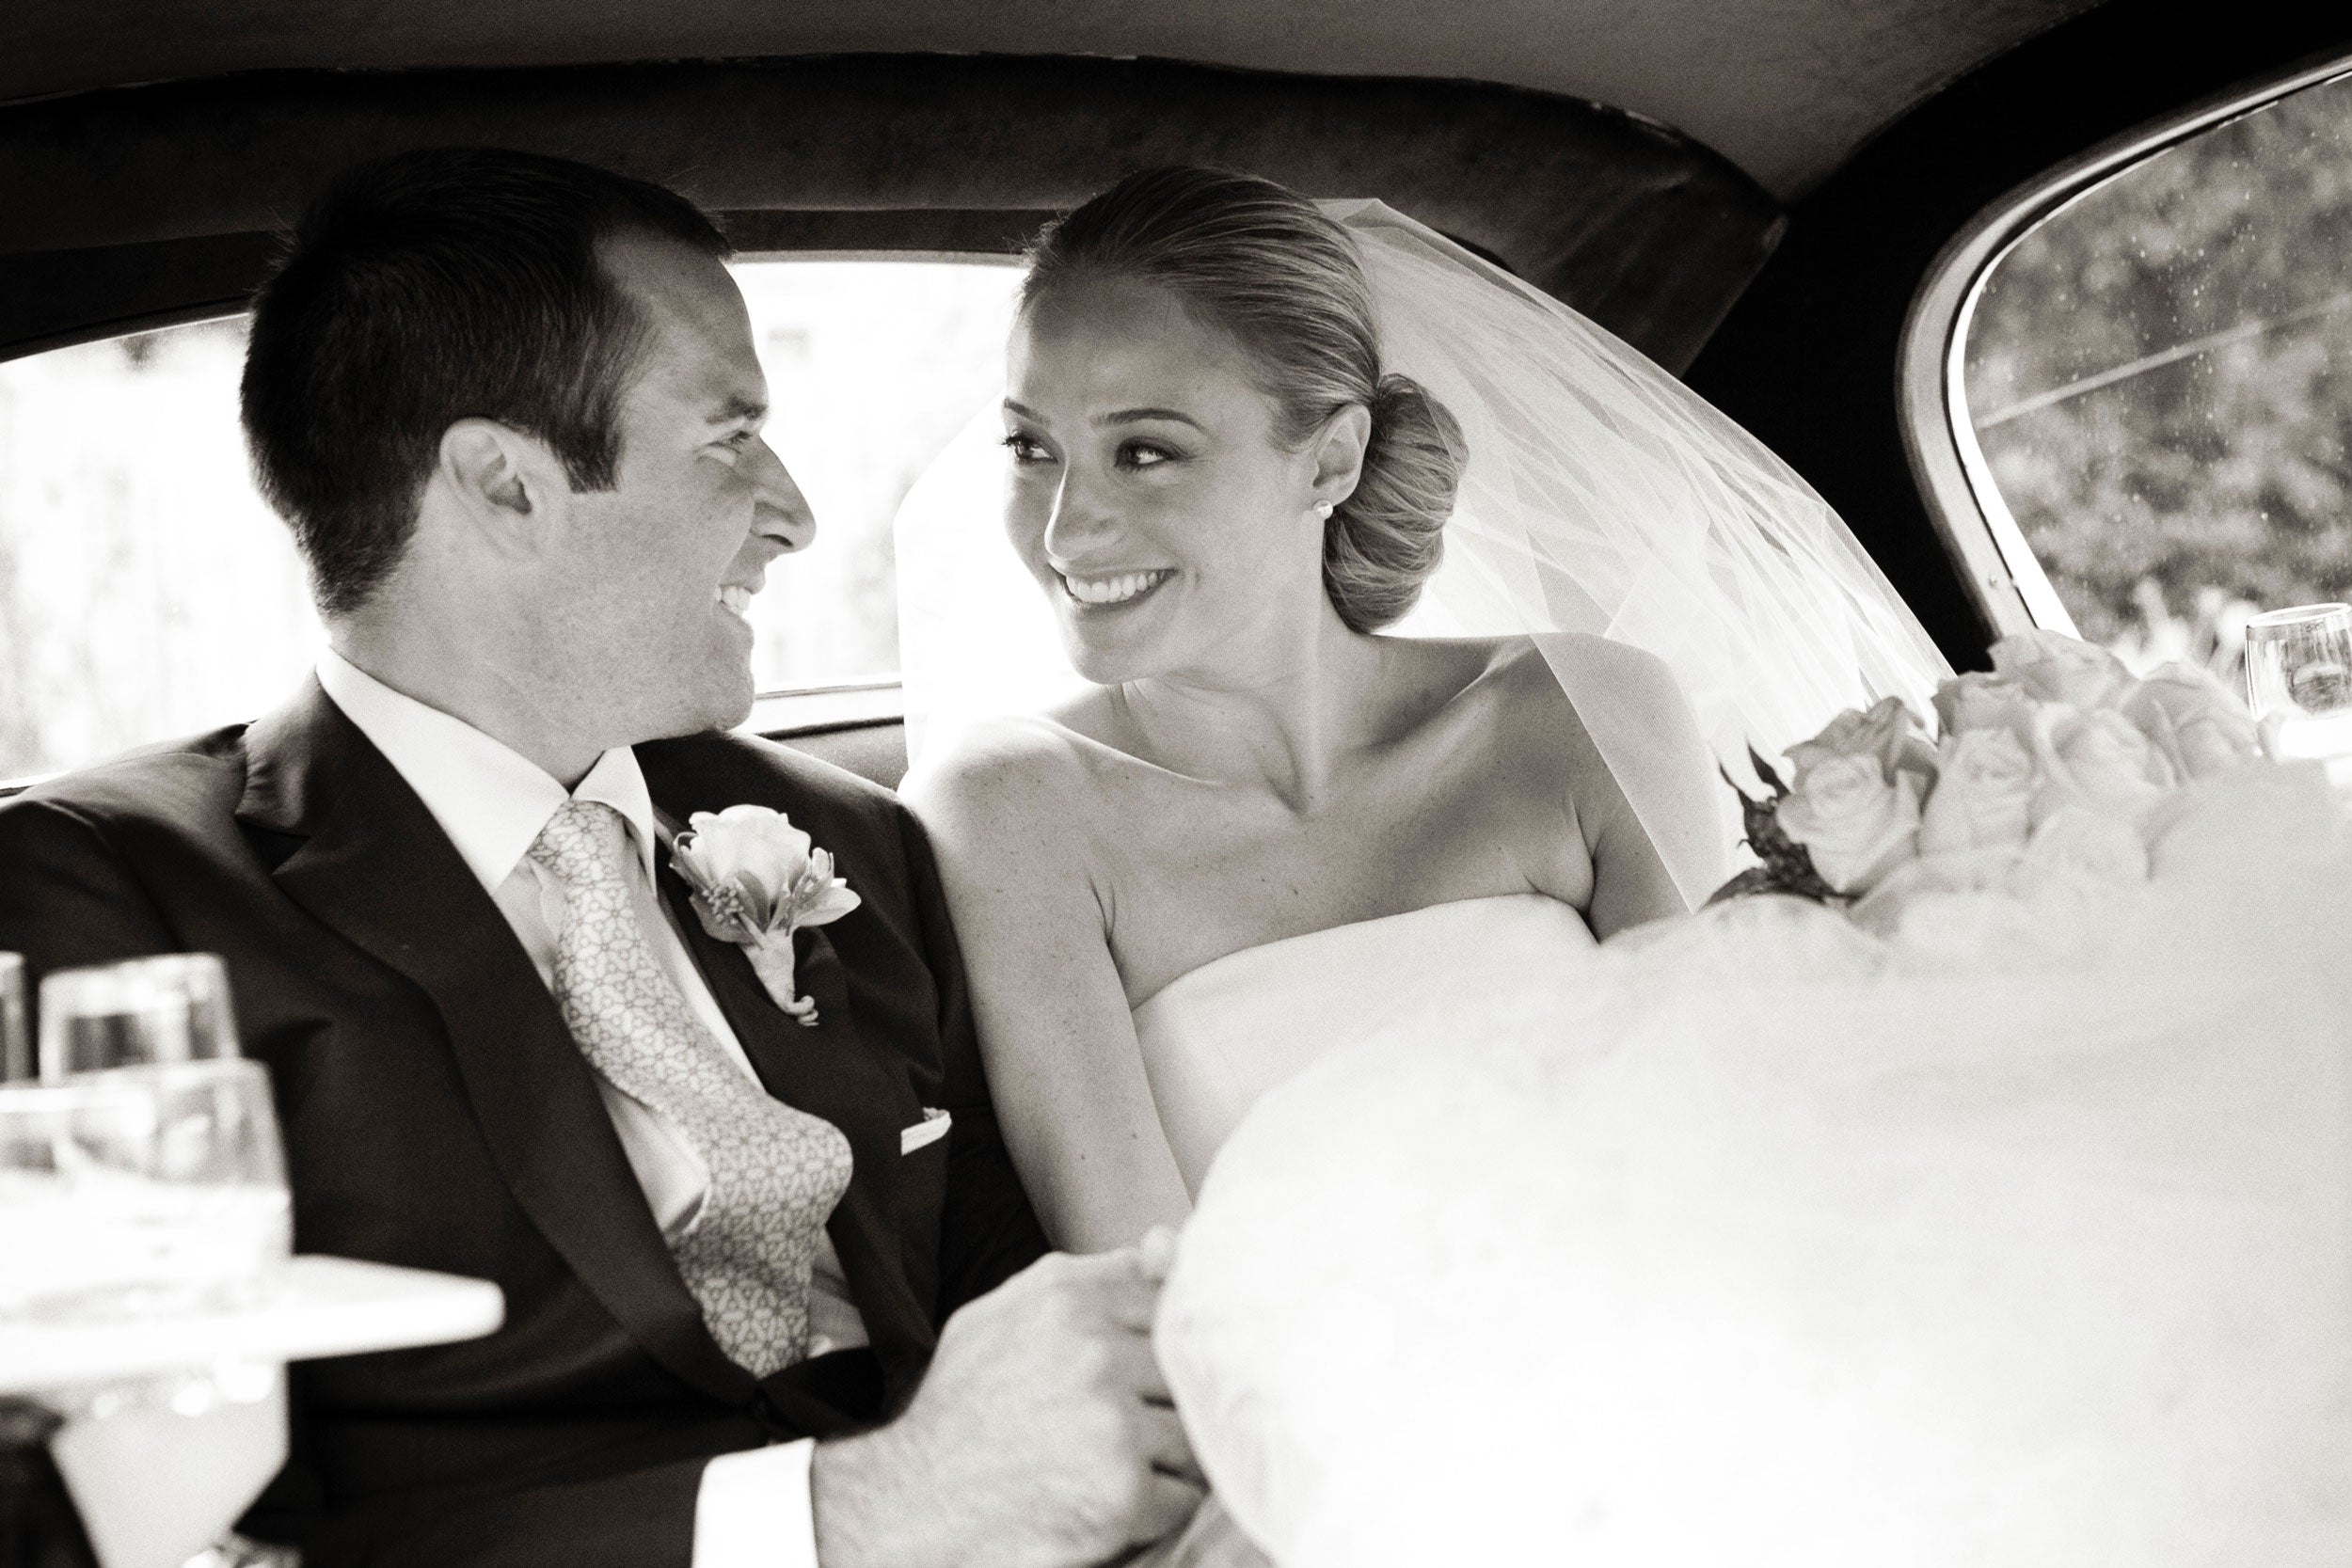 Pickett's Press Real Brides - Adrienne & Mike were wed at Holy Cross Church in Rumson, New Jersey.